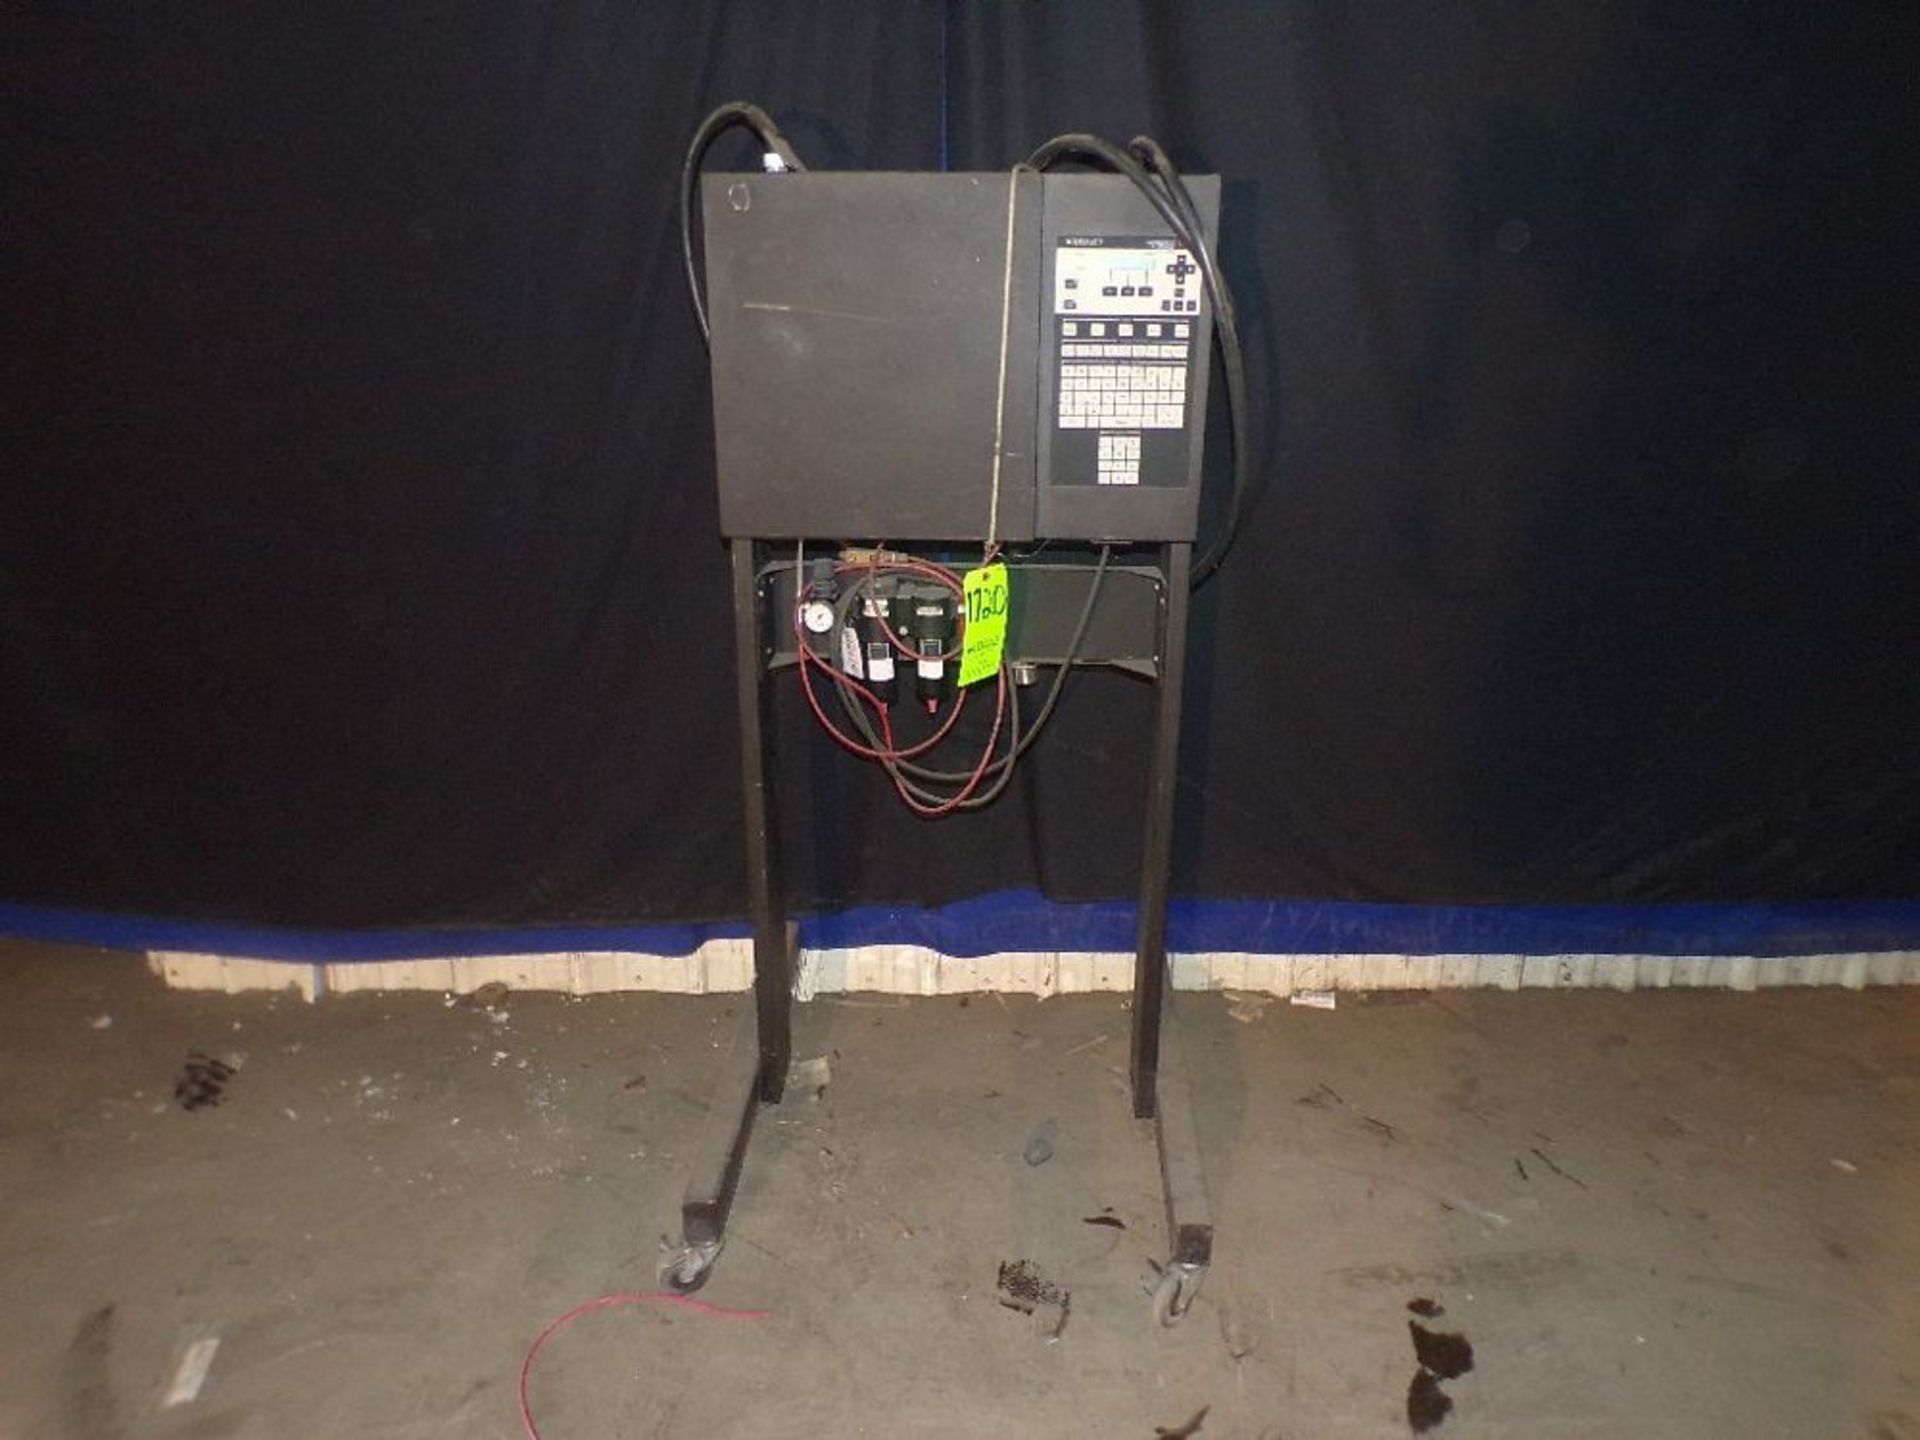 Qty (1) VideoJet 37e Ink Jet Coder - Painted steel cabinet and stand. - Equiped with remote - Image 4 of 7